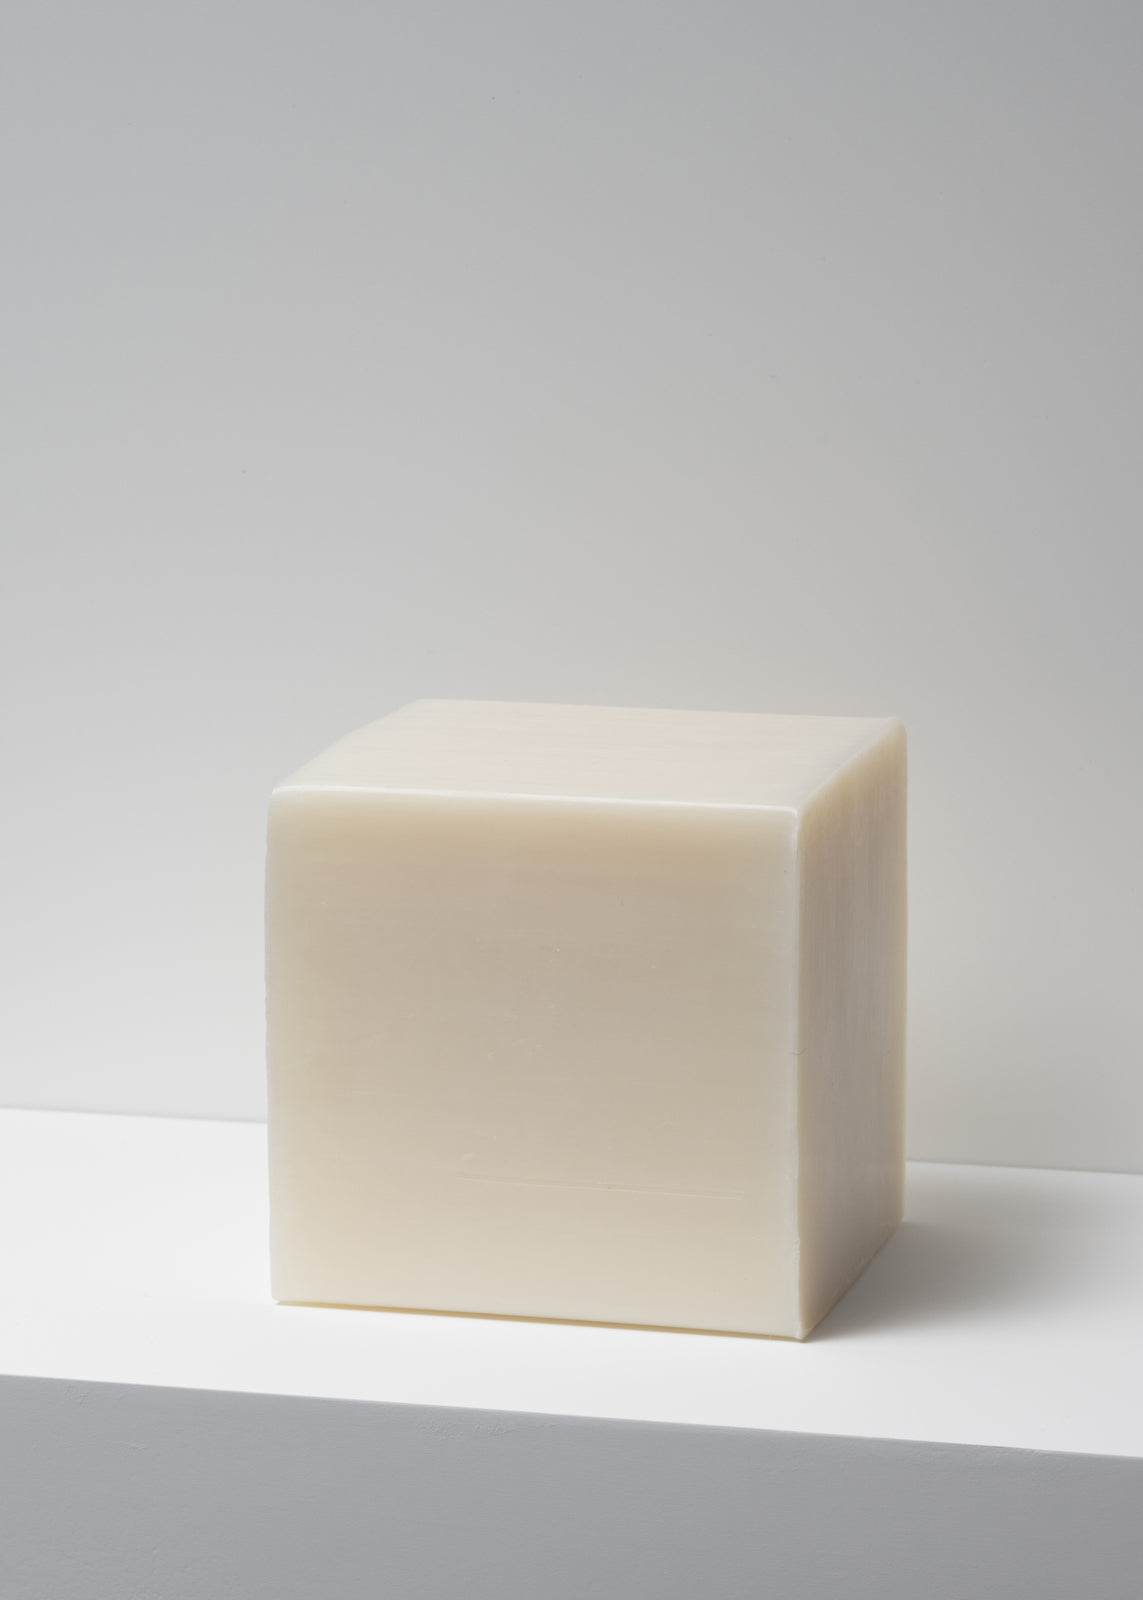 The Big Block AE GI Super Mild Soap. An oversized, cube block of mild and soothing rice milk and shea butter soap to cleans and soften delicate skin. 